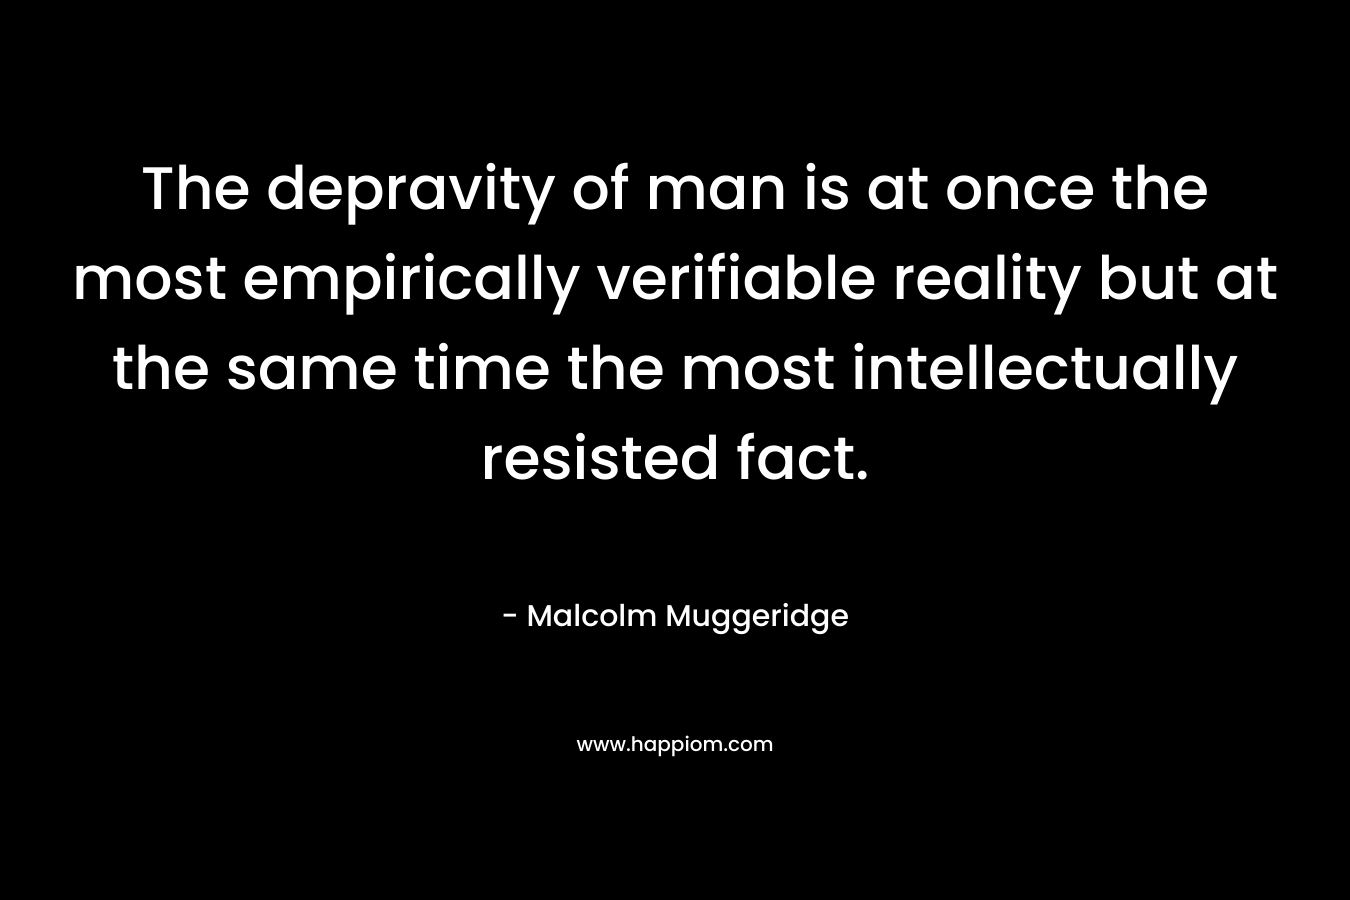 The depravity of man is at once the most empirically verifiable reality but at the same time the most intellectually resisted fact.